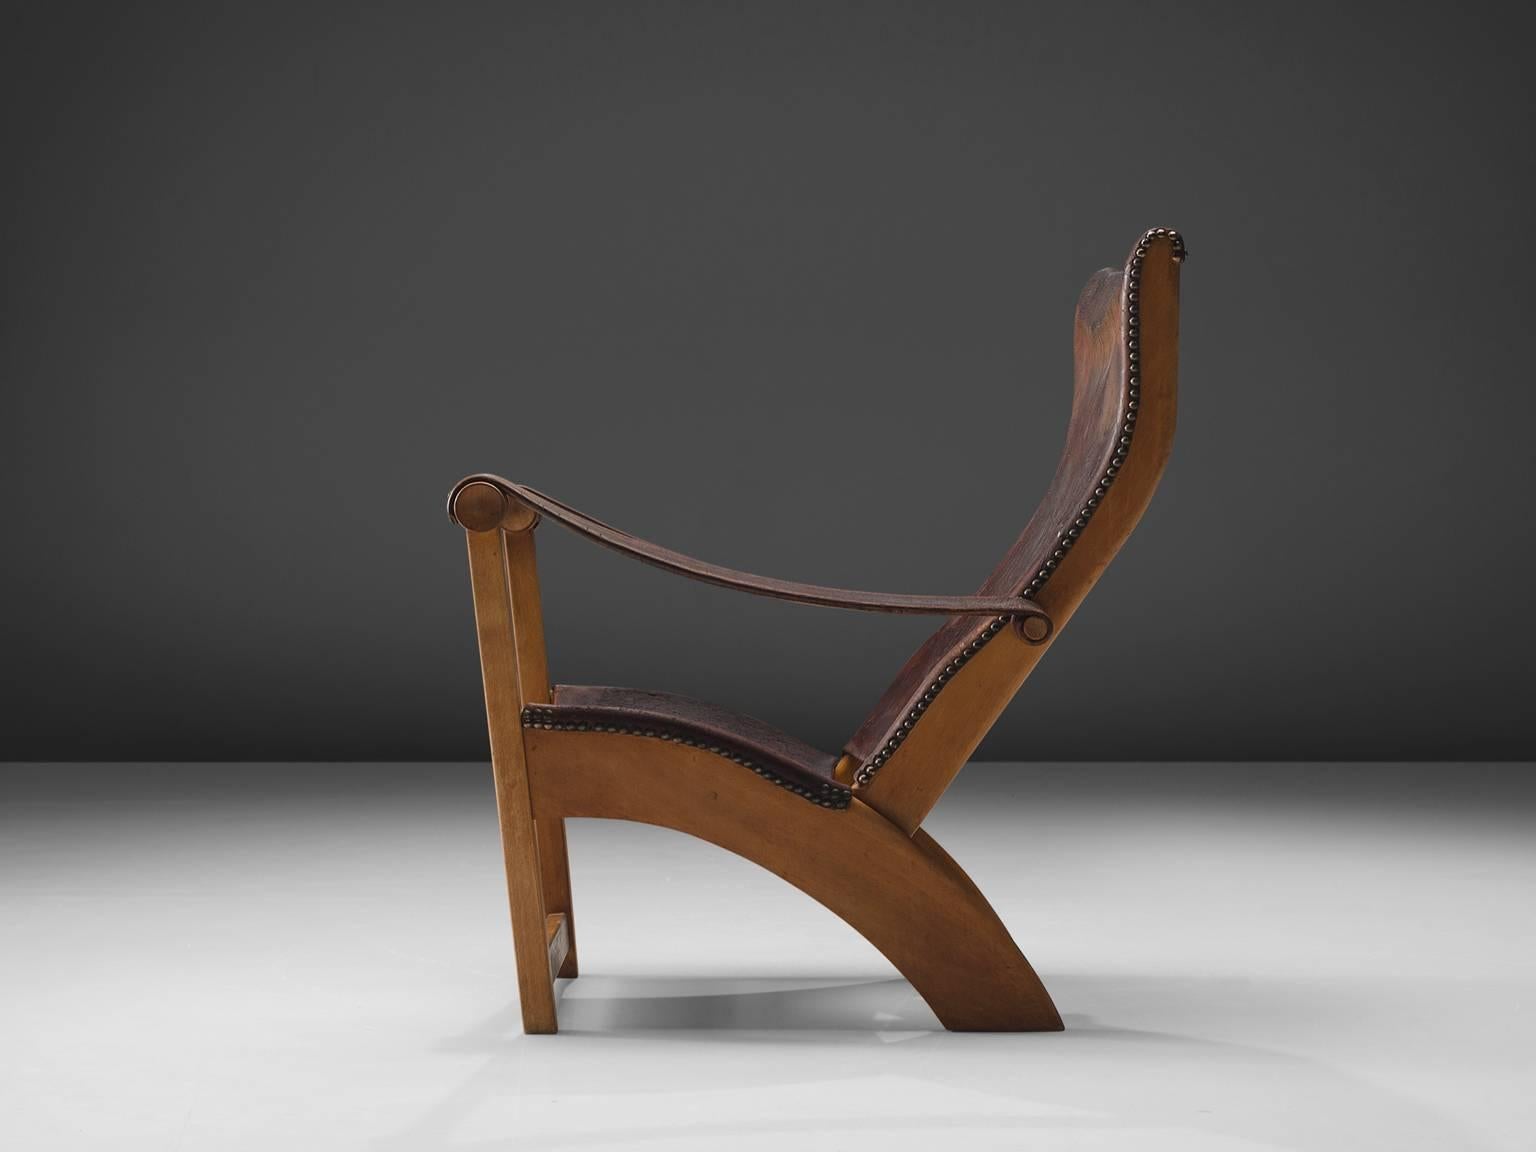 Mogens Voltelen for cabinetmaker Niels Vodder, lounge chair model 'Københavnerstolen', beech and brown leather, Denmark, 1936. 

This Copenhagen lounge chair is designed by Mogens Voltelen. Classic early edition in which the armrests are attached